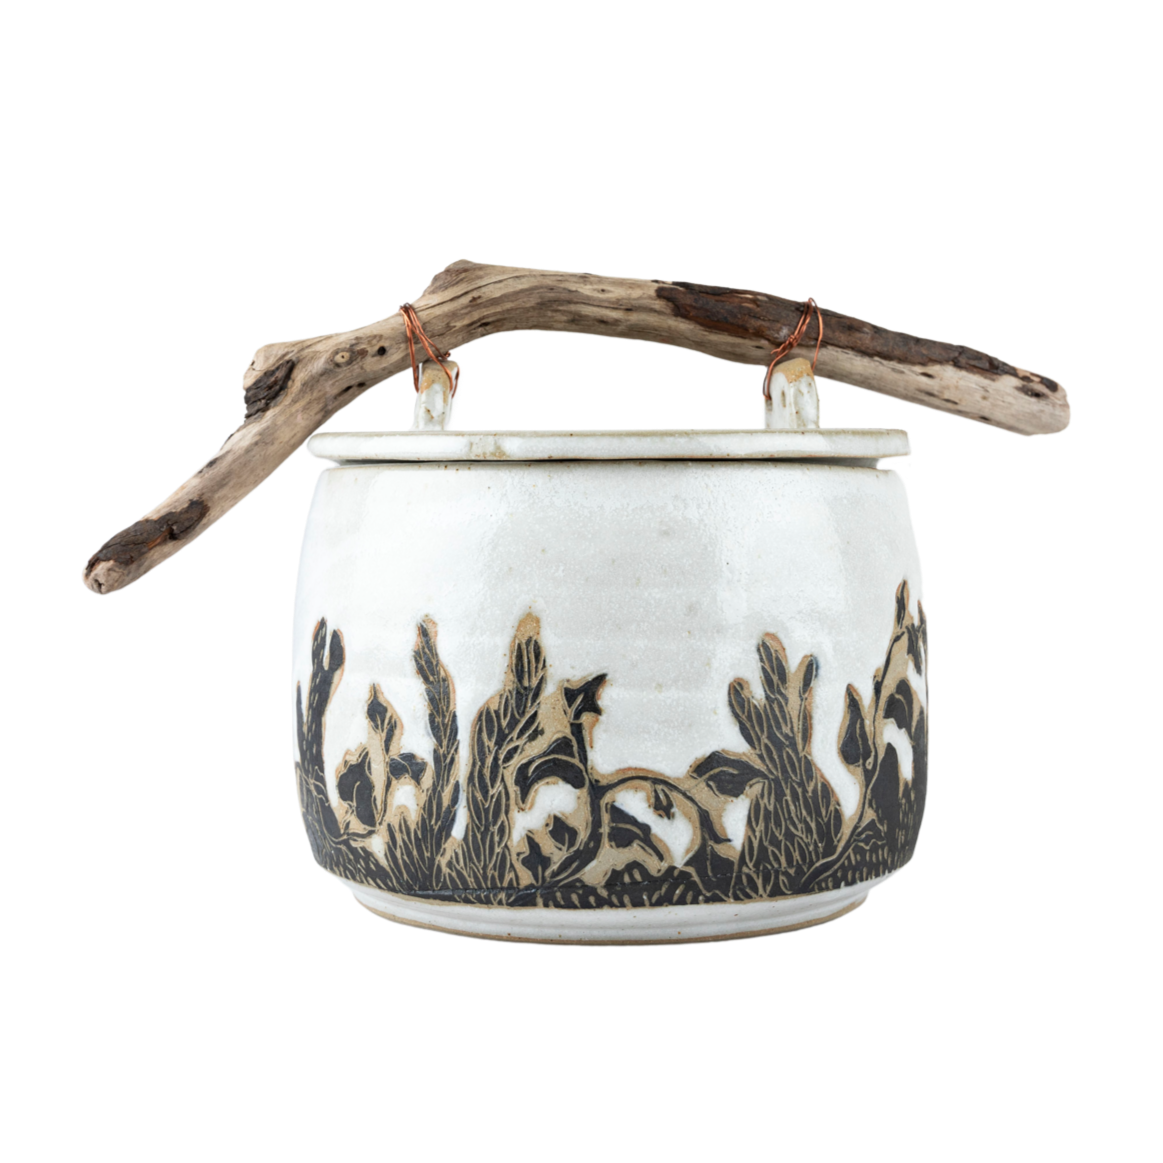 Wild Ones Cannister with Driftwood Handle by River Ceramics, Margaret River, WA